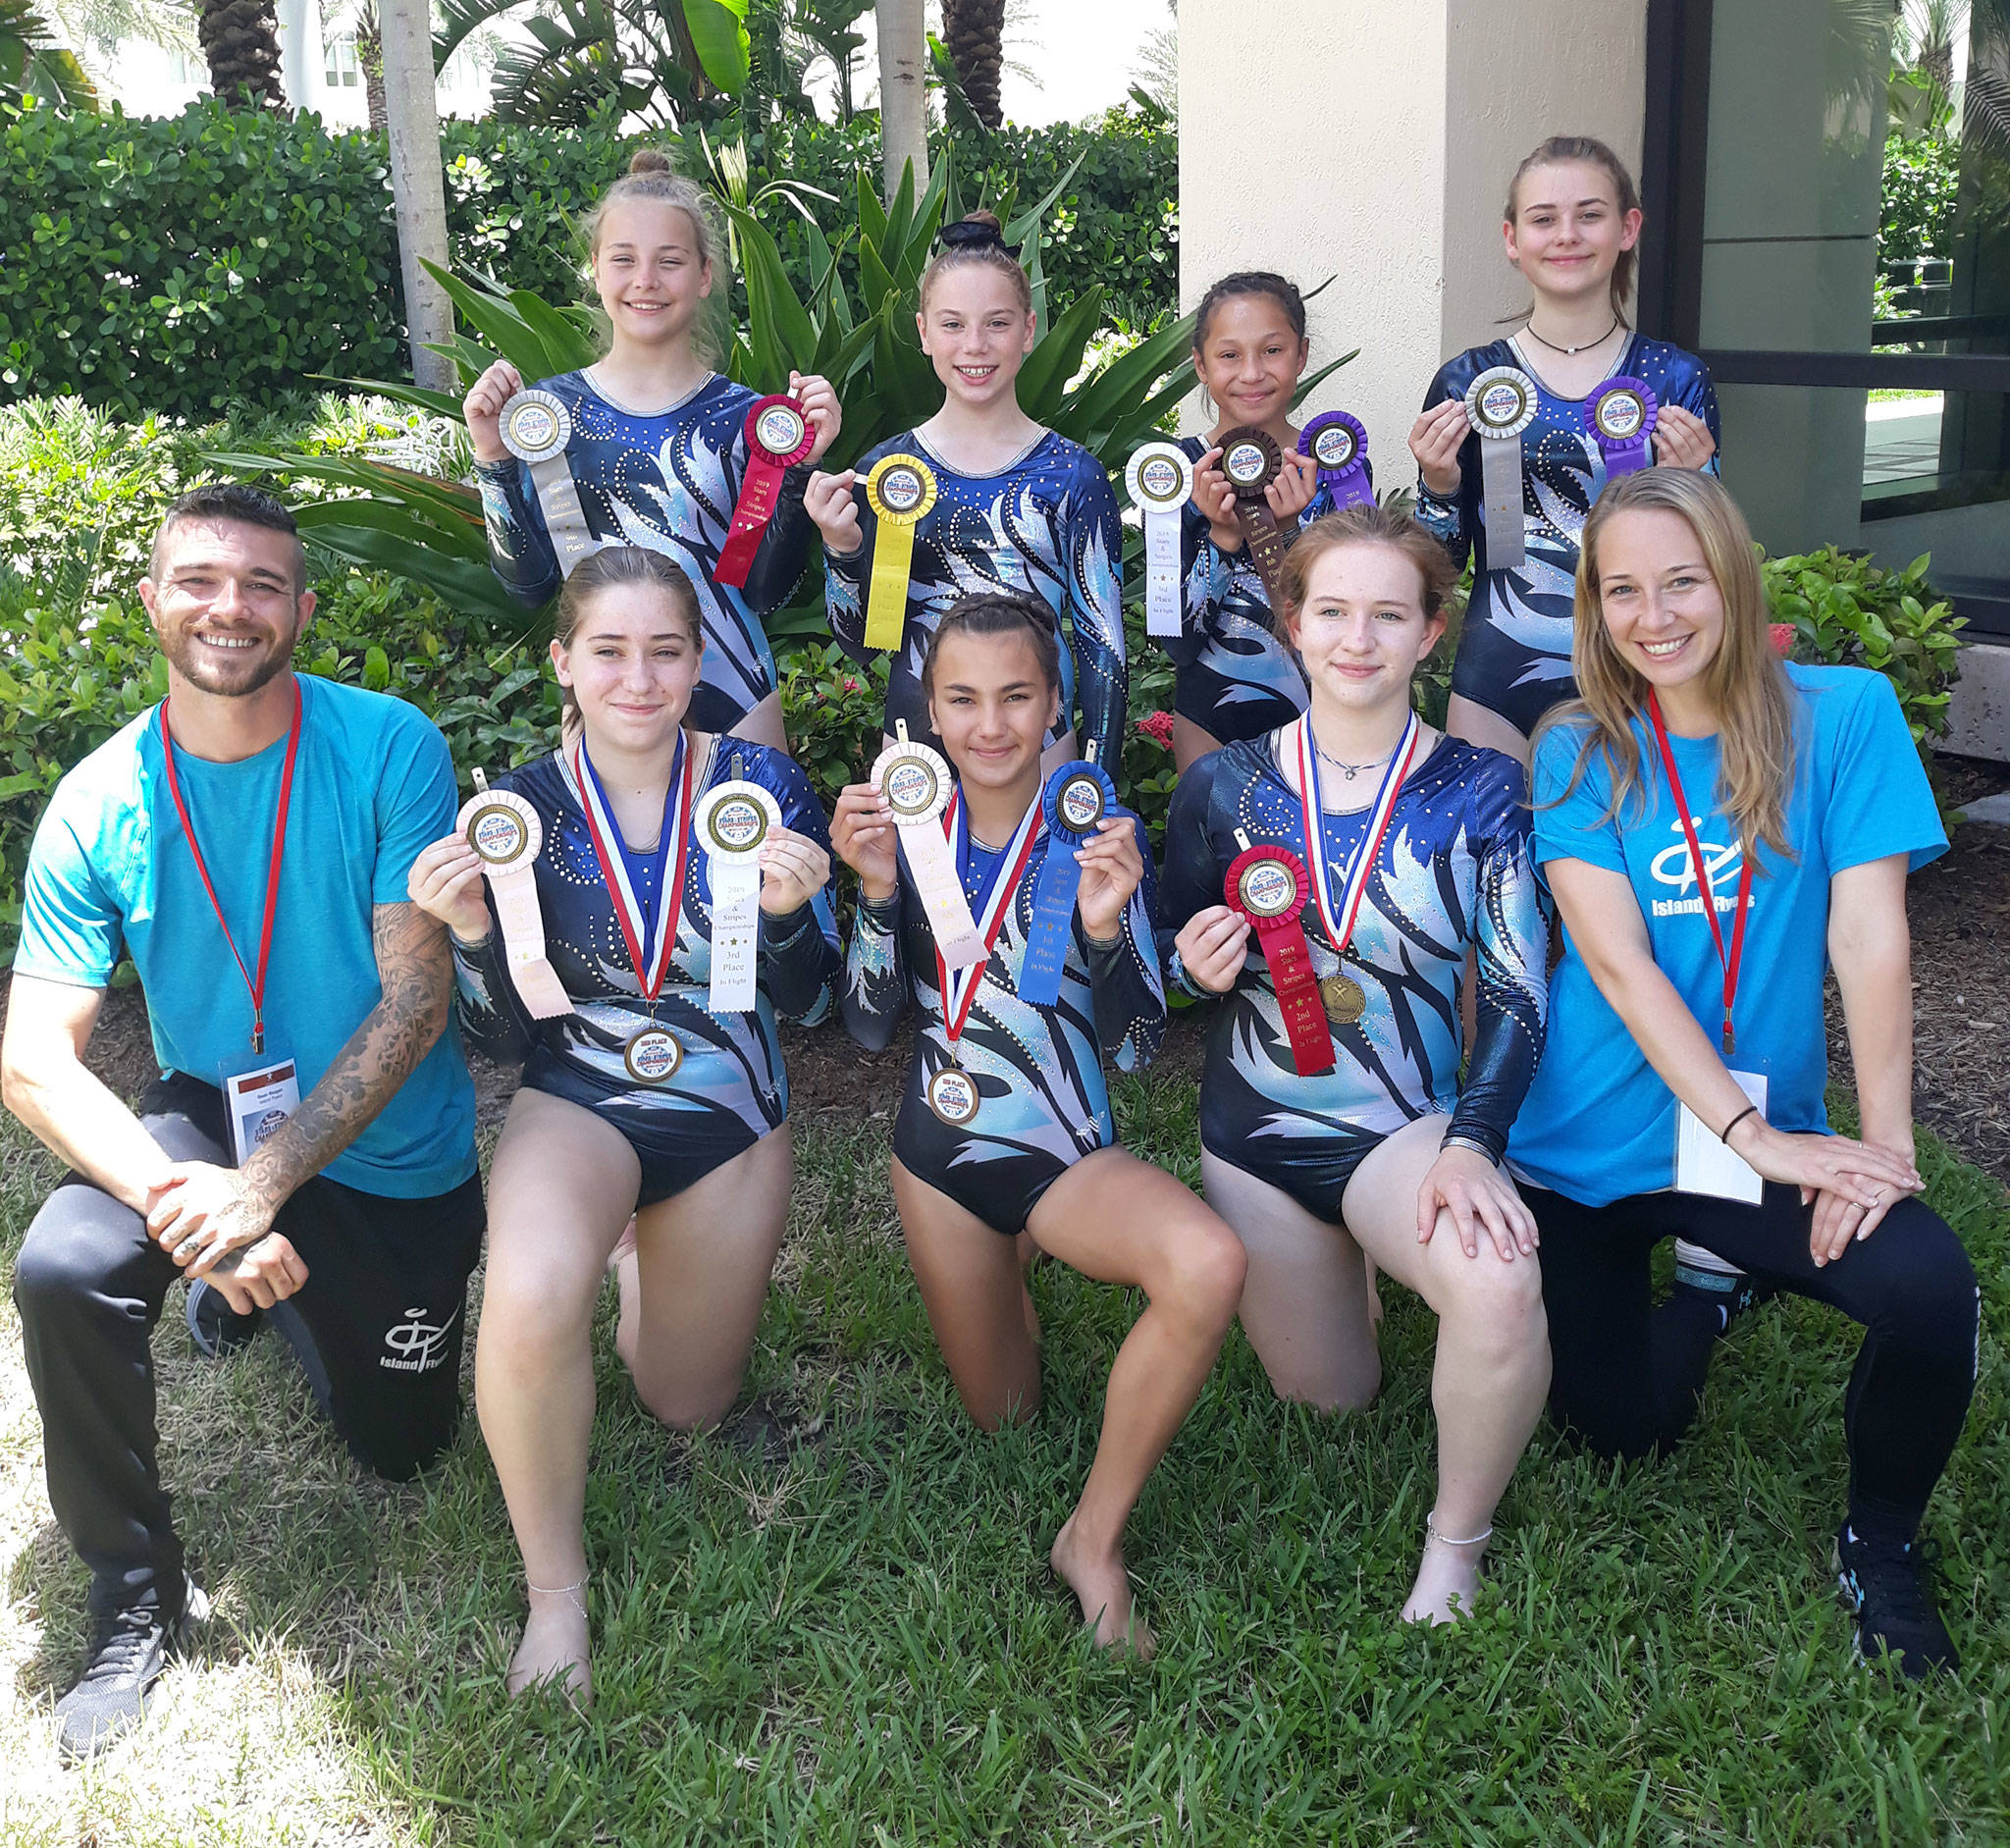 The Island Flyers show off the medals they won at the national championships last weekend. Front row, left to right: coach Sean Reagan, Catrina Ocanas, Keira Smith, Cassidy Gore and coach Melody Reagan. Back row: Harmony Wertz, Madison Walker, Arianna Hunt and Leighlah Louis. (Submitted photo)